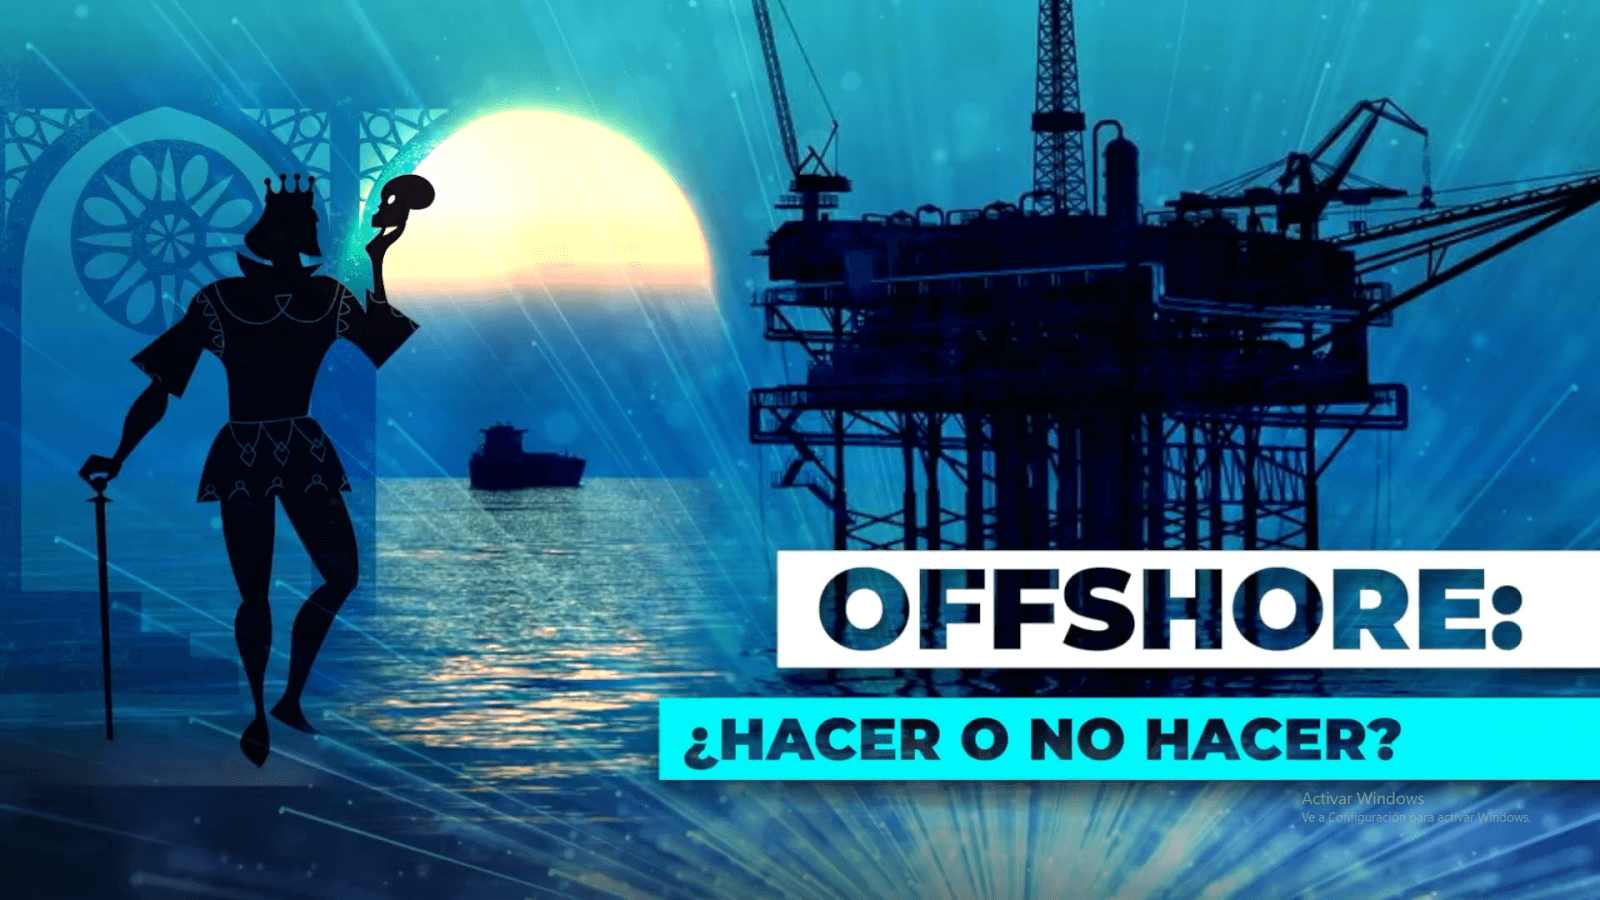 OFFSHORE: ¿HACER O NO HACER?